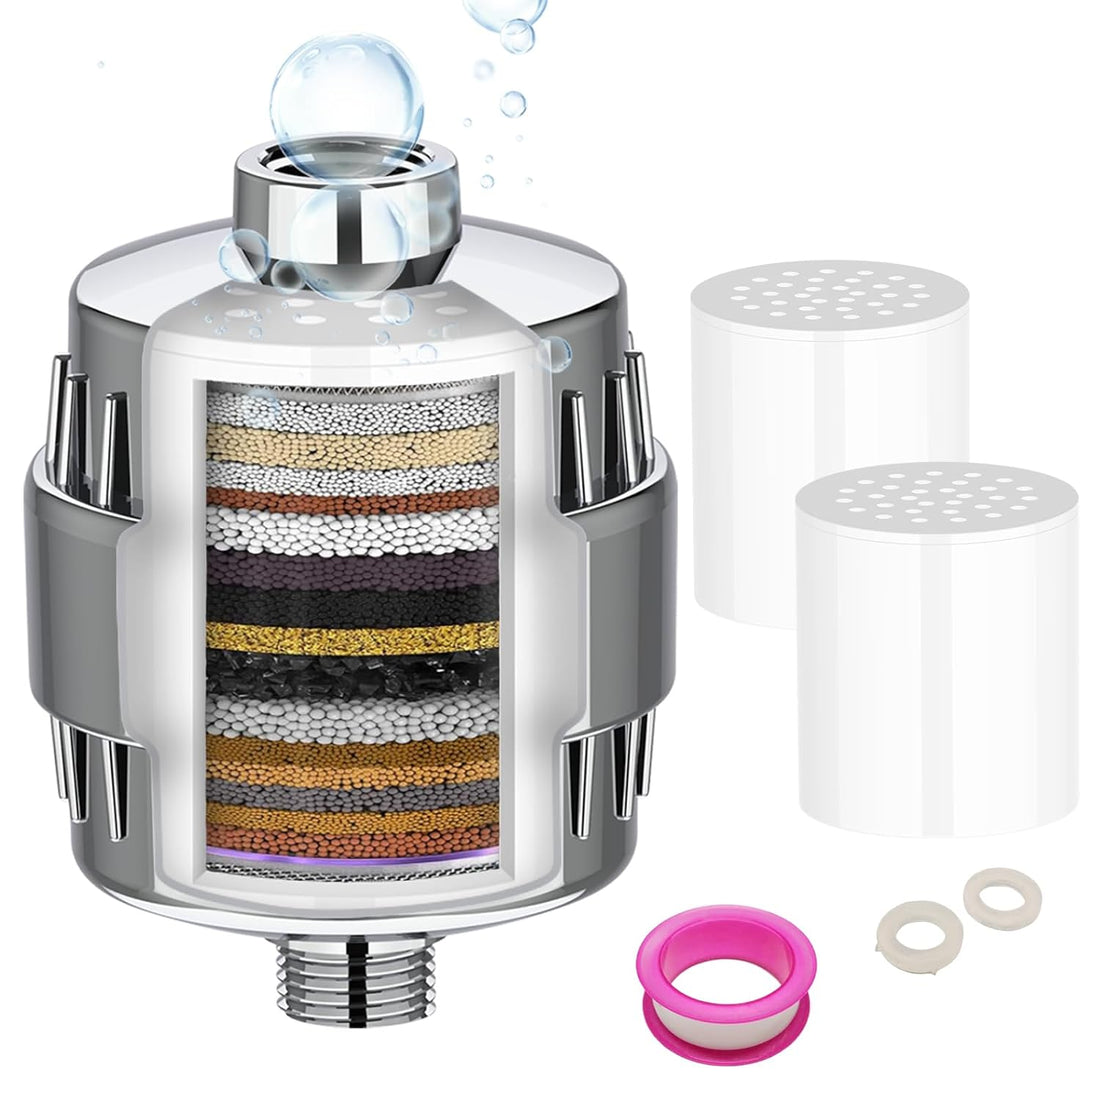 Liangyu 20 Stage Shower Filter, Shower Head Filter with Vitamin C for Hard Water, with 2 Filter Cartridges, High Output Shower Water Filter for Removing Chlorine and Fluoride, Polished Chrome